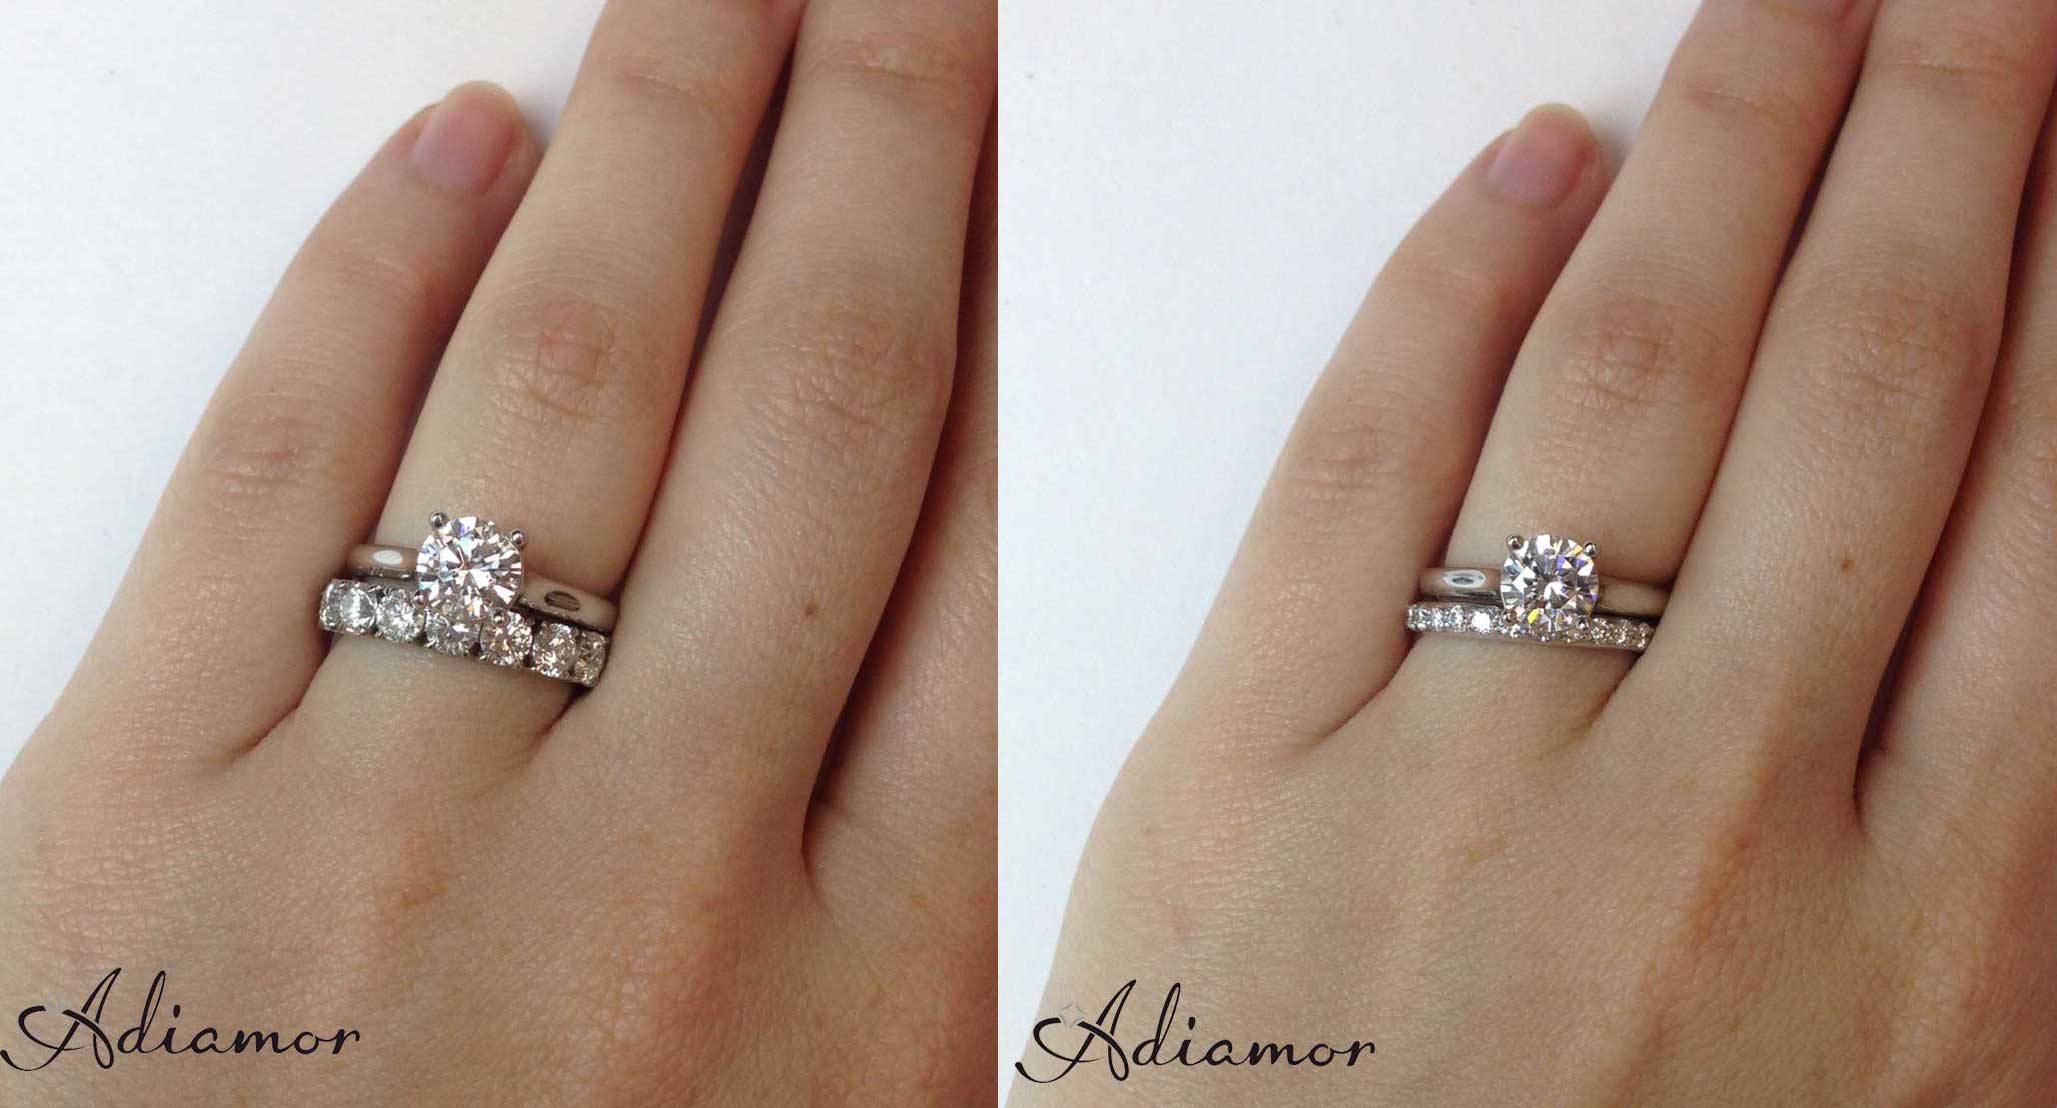 Solitaire Diamond Ring with 1 cttw and 3 cttw Eternity Bands